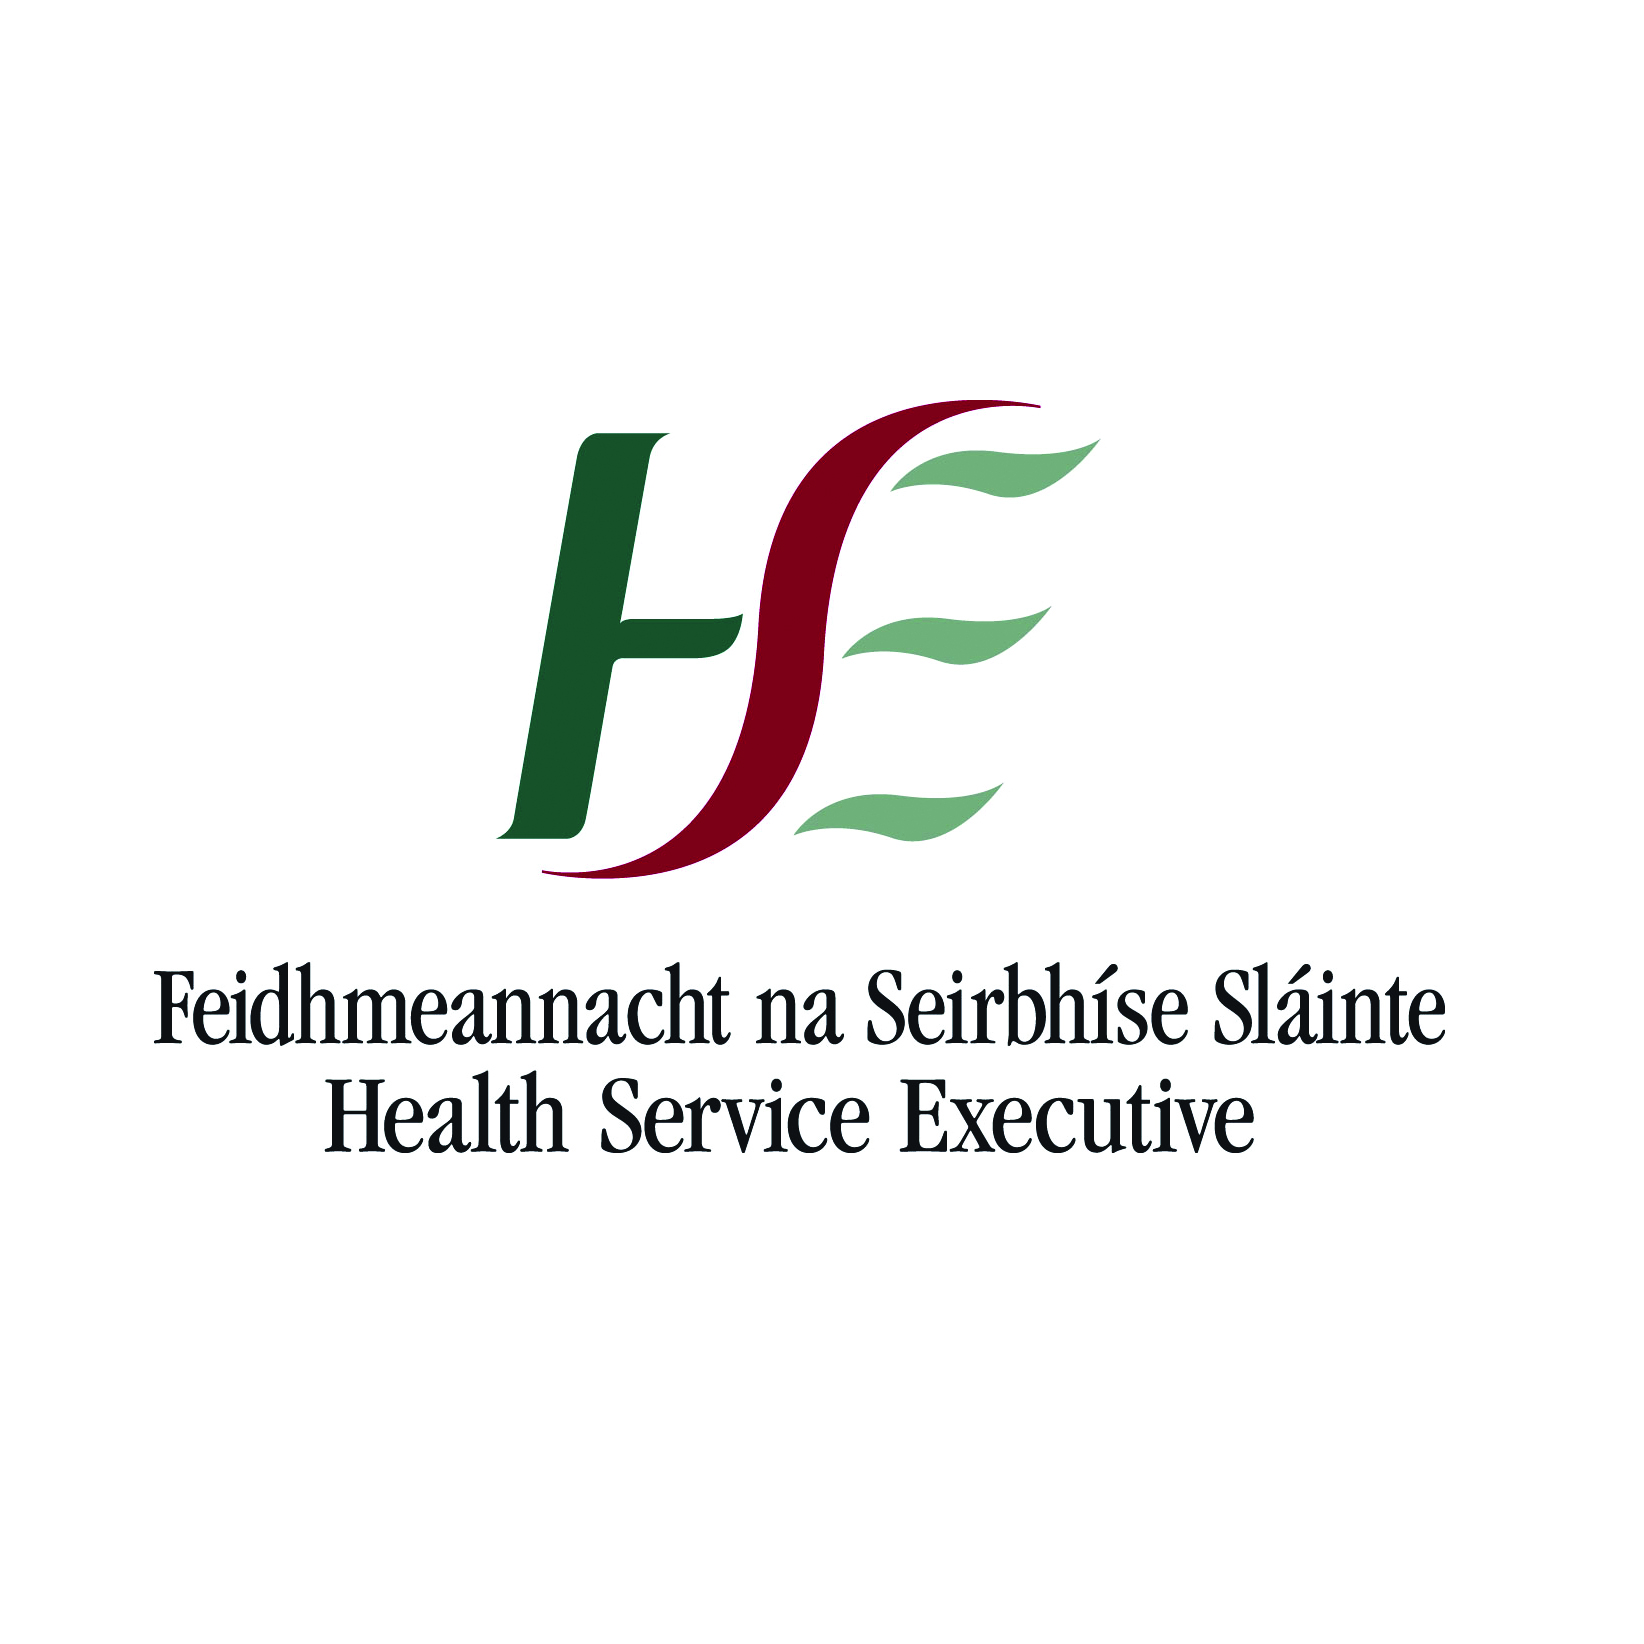 HSE to tender for variety of its medical services